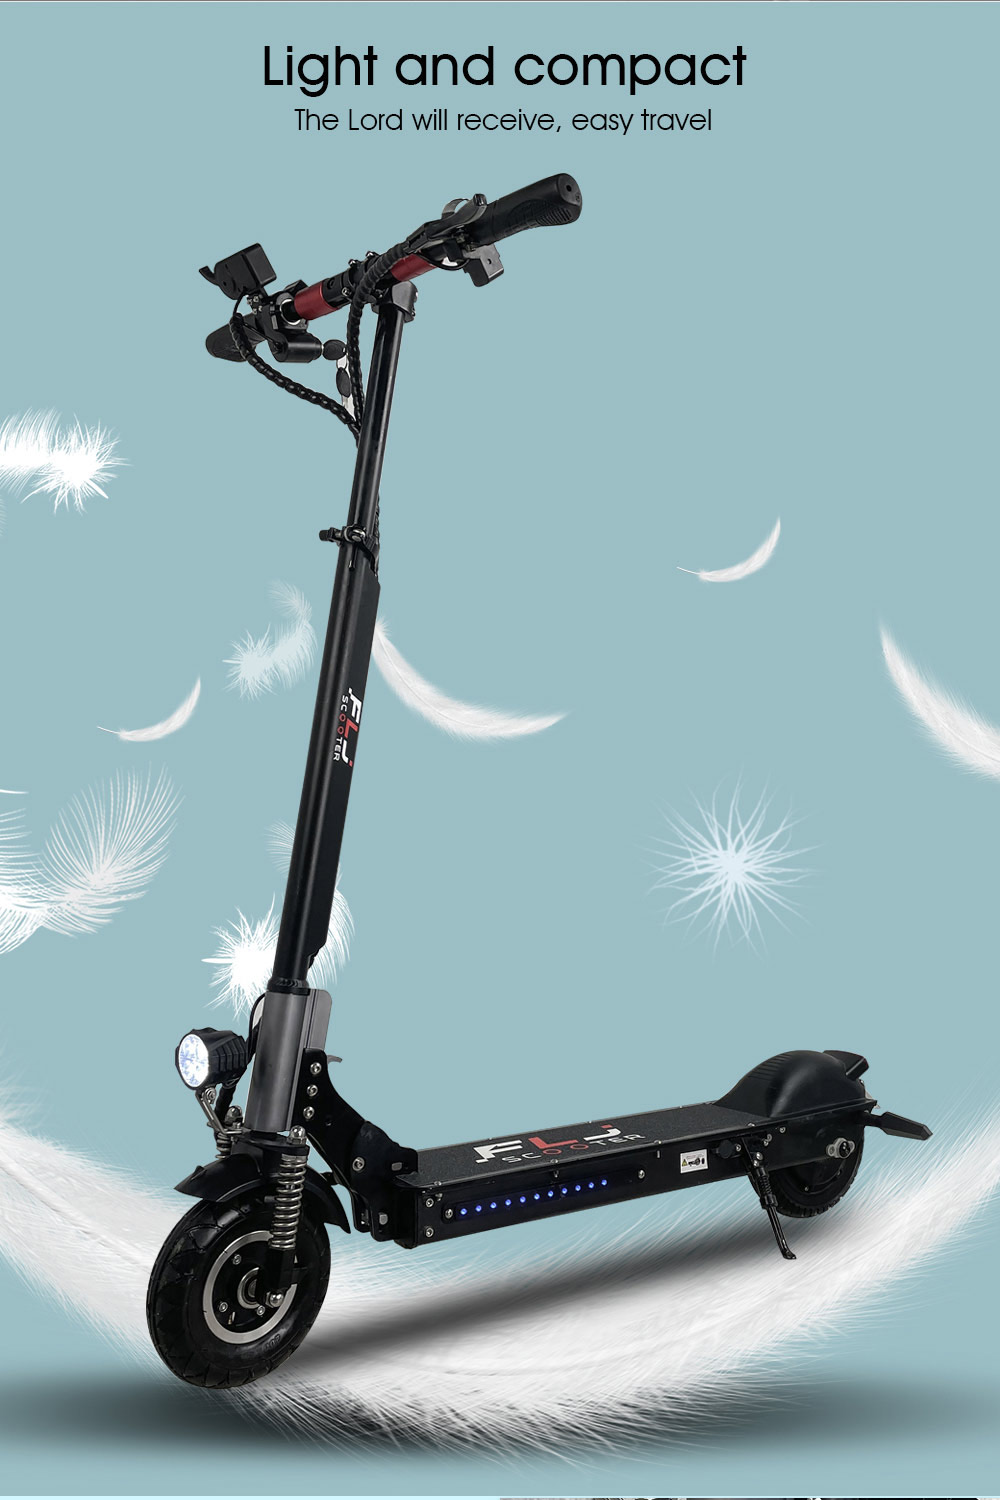 https://img.gkbcdn.com/s3/d/202209/FLJ-C8-800W-Motor-Electric-Scooter-without-Seat-517212-4.jpg